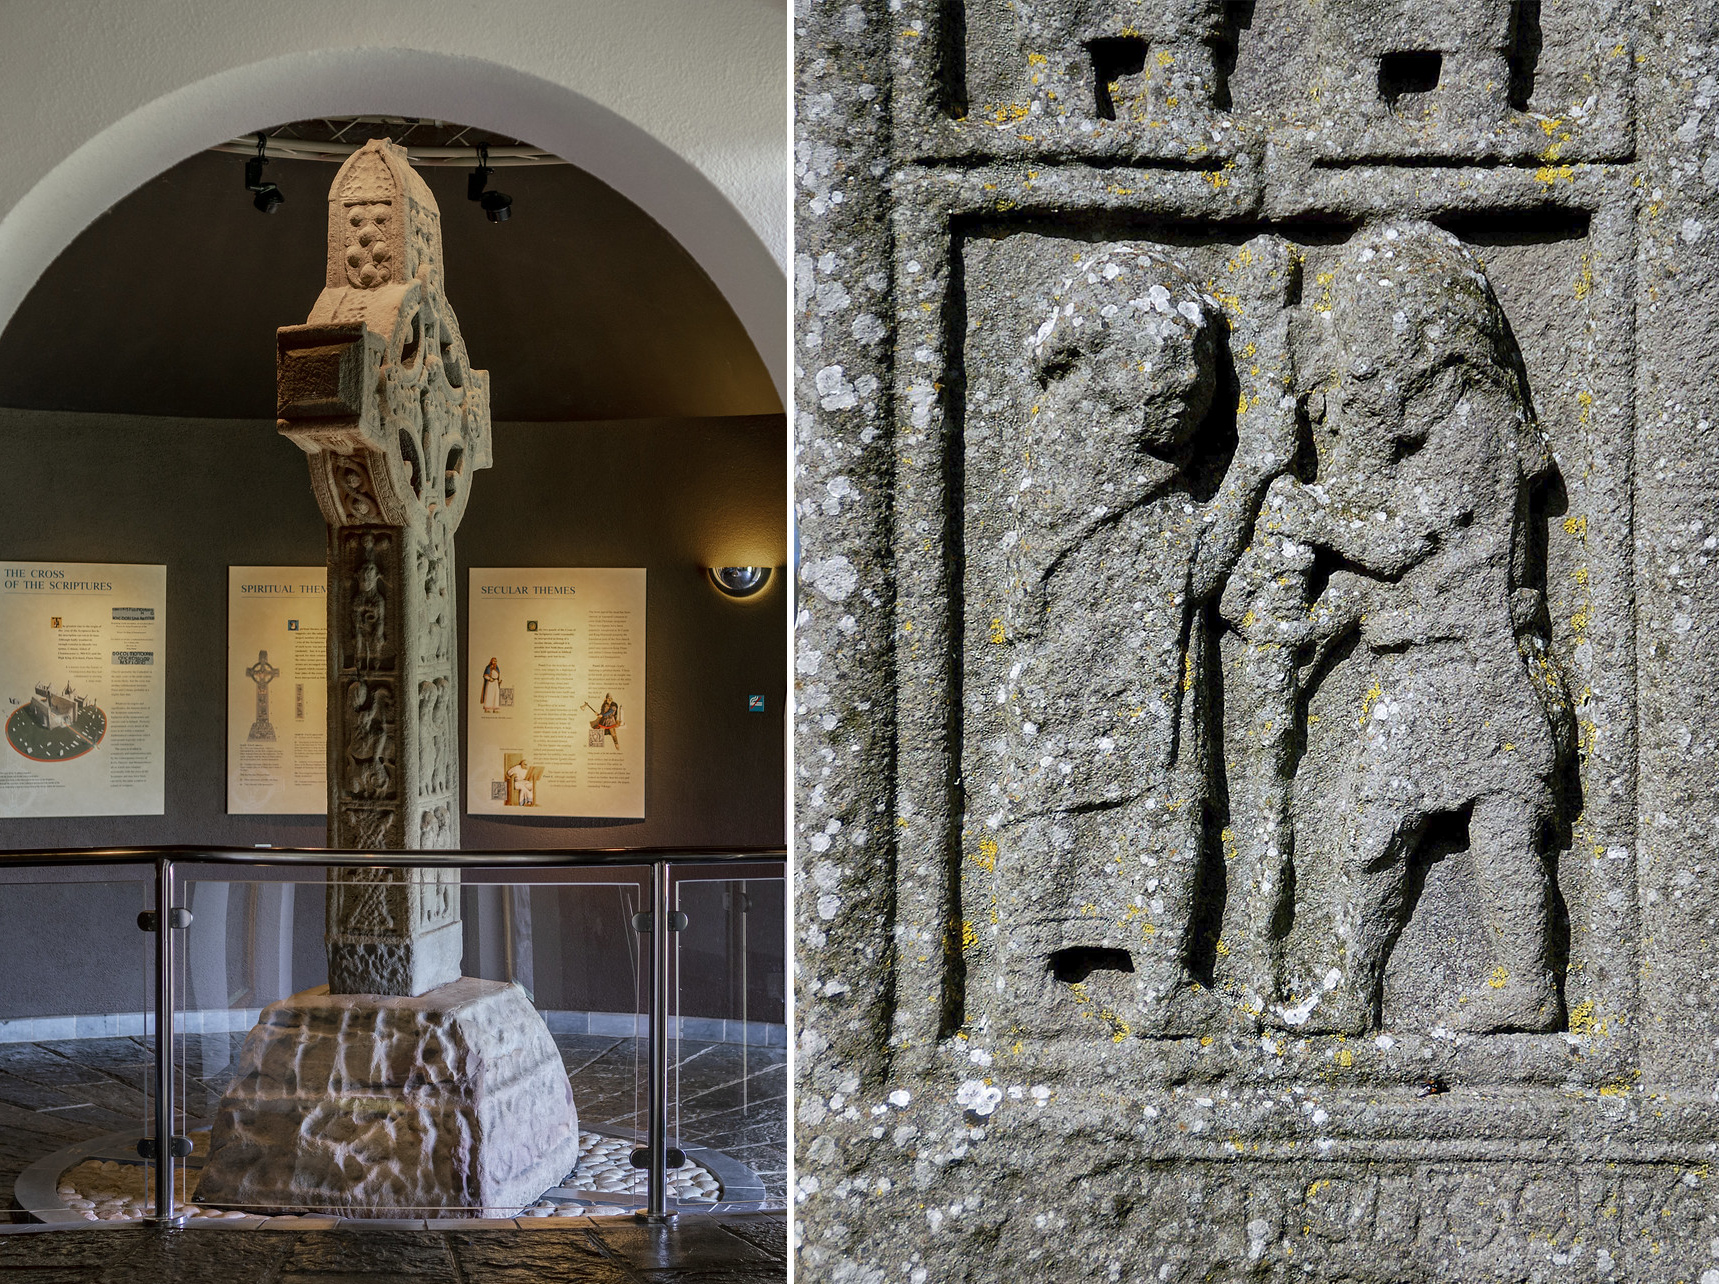 Left: Cross of the Scriptures, Clonmacnoise monastery, founded 544 by St Ciarán, County Offaly (photo: Steven Zucker, CC BY-NC-SA 2.0); right: detail of a East face base panel (inscription: "a prayer for Colman who erected this cross for King Flann"), original created in 9th C. (replica placed in the location of the original), Clonmacnoise (Cluain Mhic Nóis), Co. Offaly (photo: Keith Ewing, CC BY-NC 2.0)